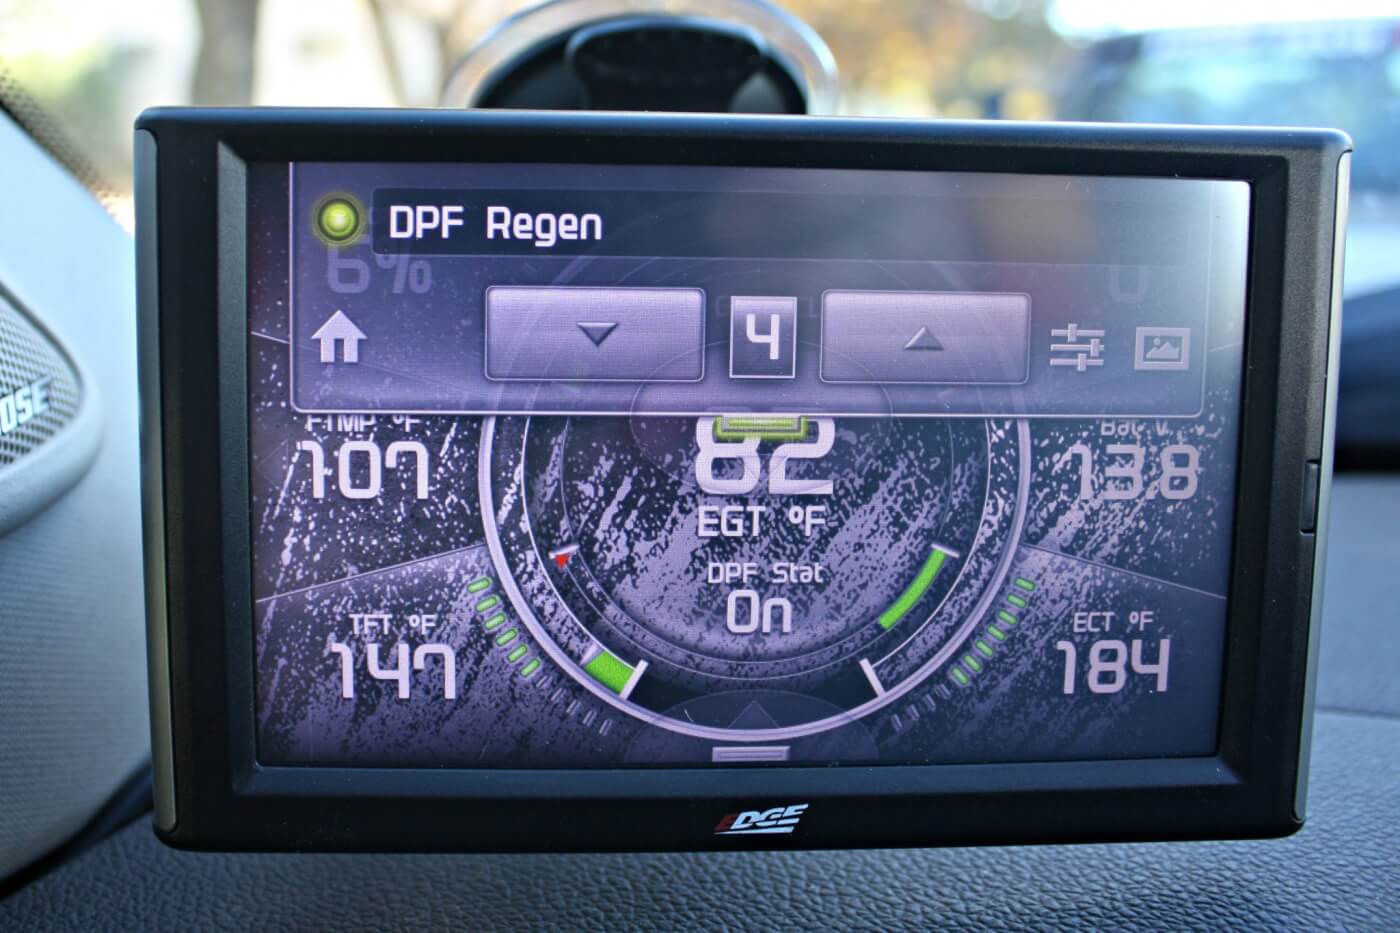 17. A nice feature to the Juice with Attitude is the ability to change power levels while driving, a simple drop-down screen gives the driver access to five different power levels and will also display DPF status. On the chassis dyno at the Edge Products facility, the all-stock truck produced 319hp/616ft-lbs. torque. After our installation was complete, the AFE Power parts and Edge Juice was set on level 5; our truck peaked at 410 hp and 775ft-lbs. and saw gains of 91 hp and 159ft-lbs., all while keeping 100-percent emissions compliant.